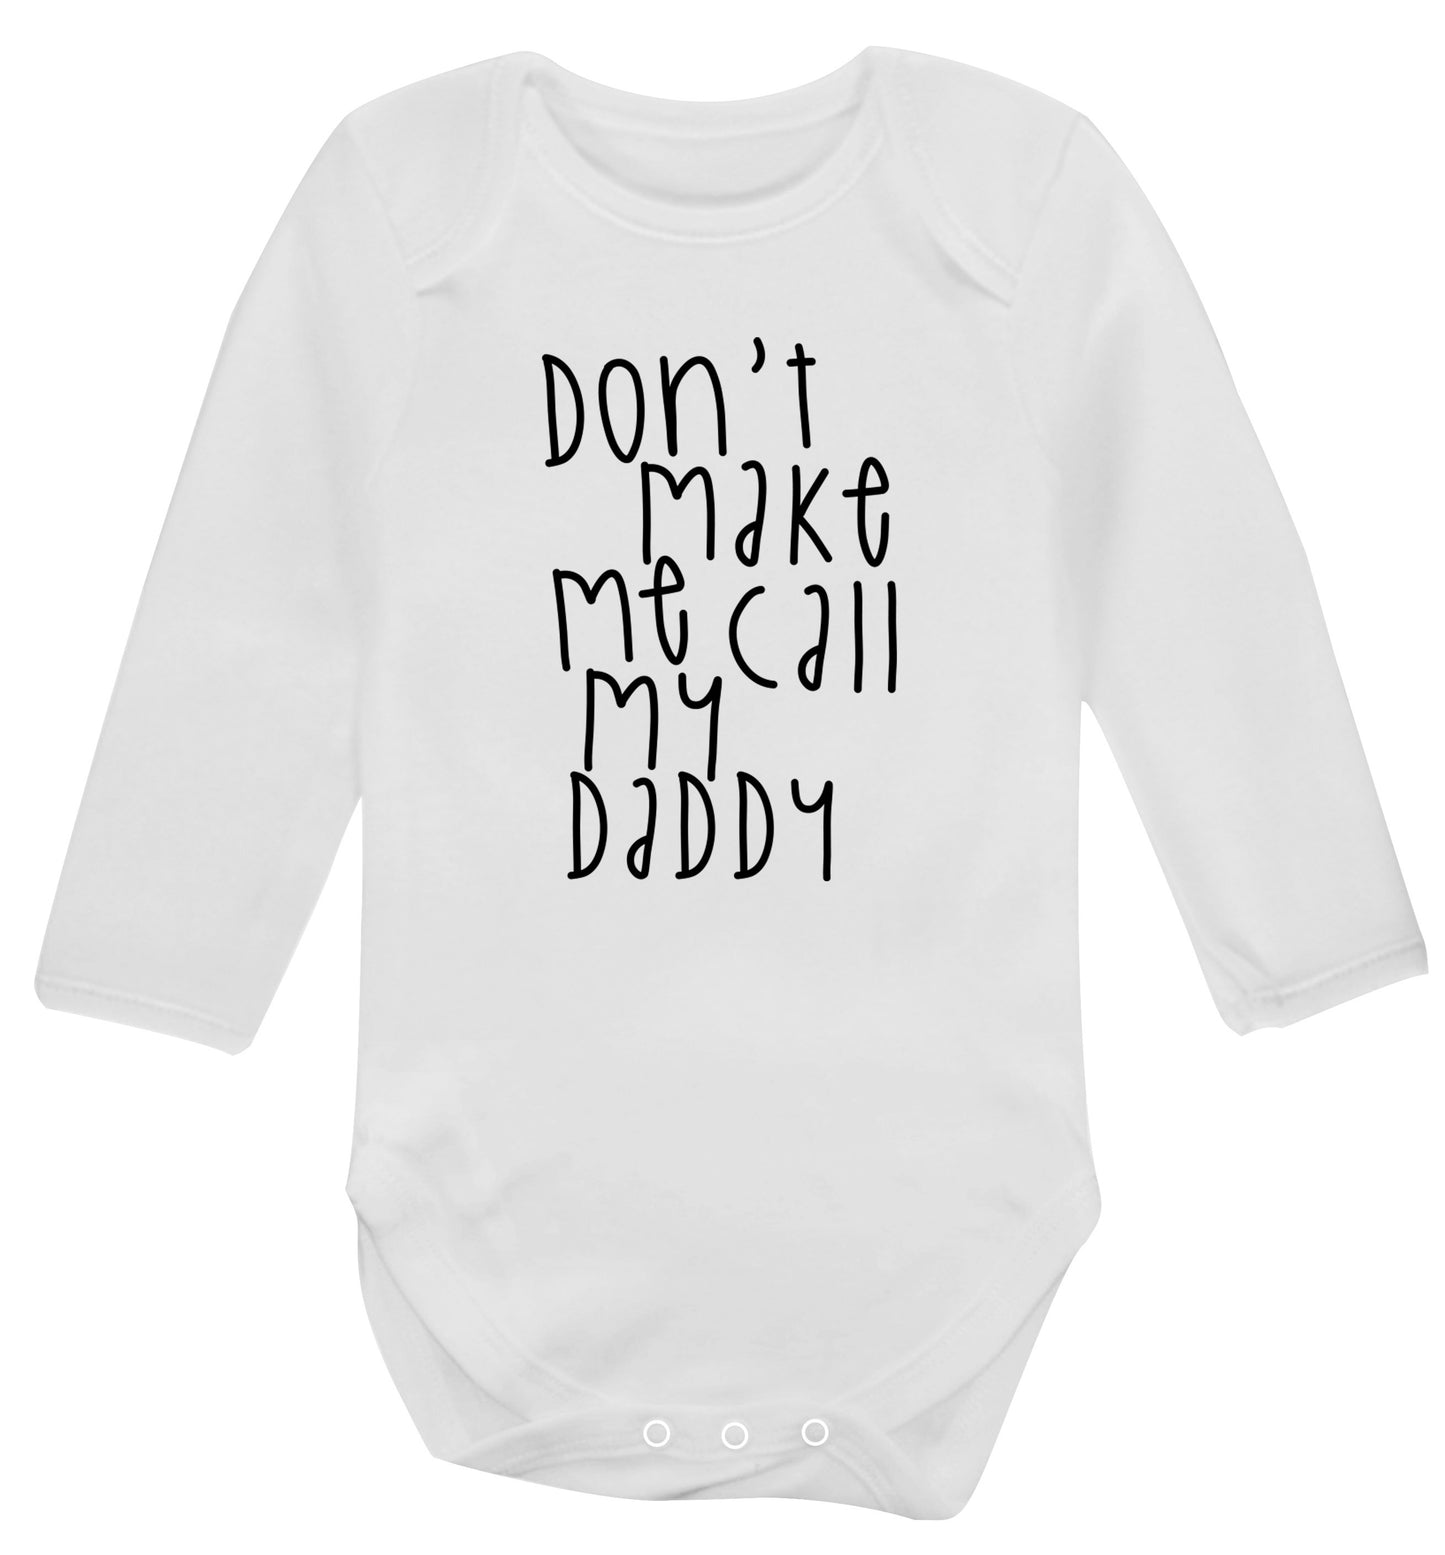 Don't make me call my daddy Baby Vest long sleeved white 6-12 months